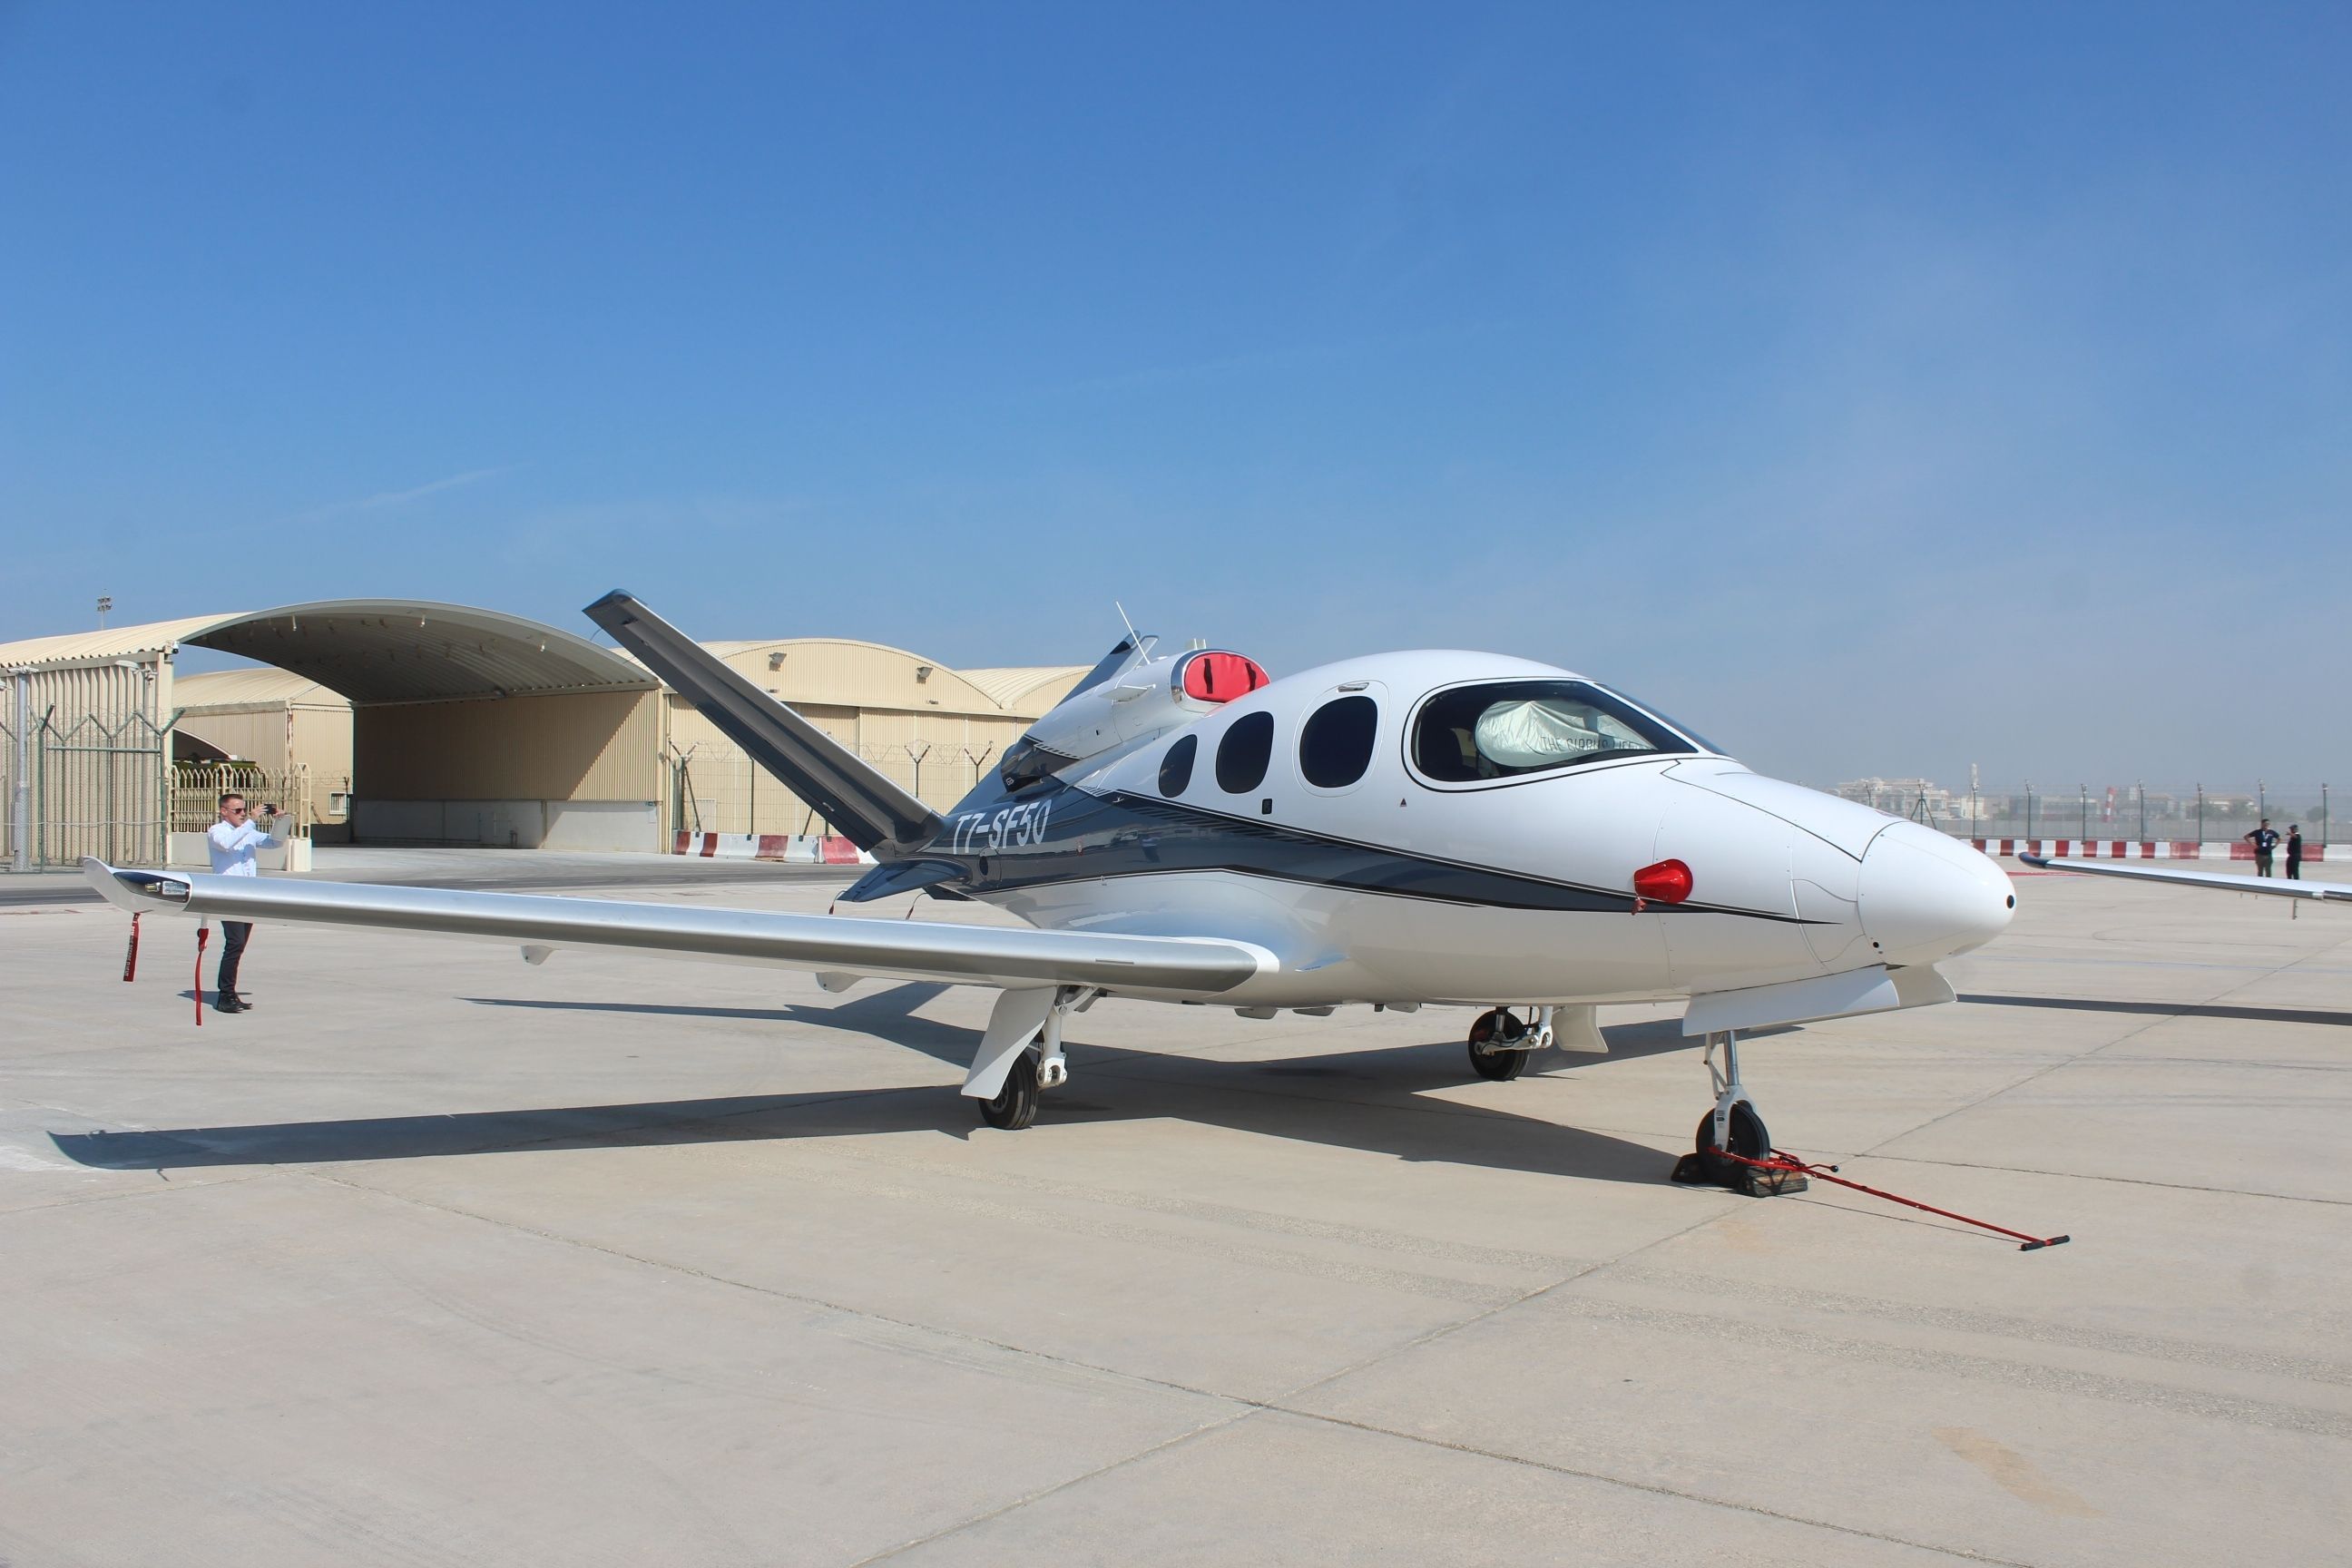 A Cirrus Vision Jet parked at an airport.